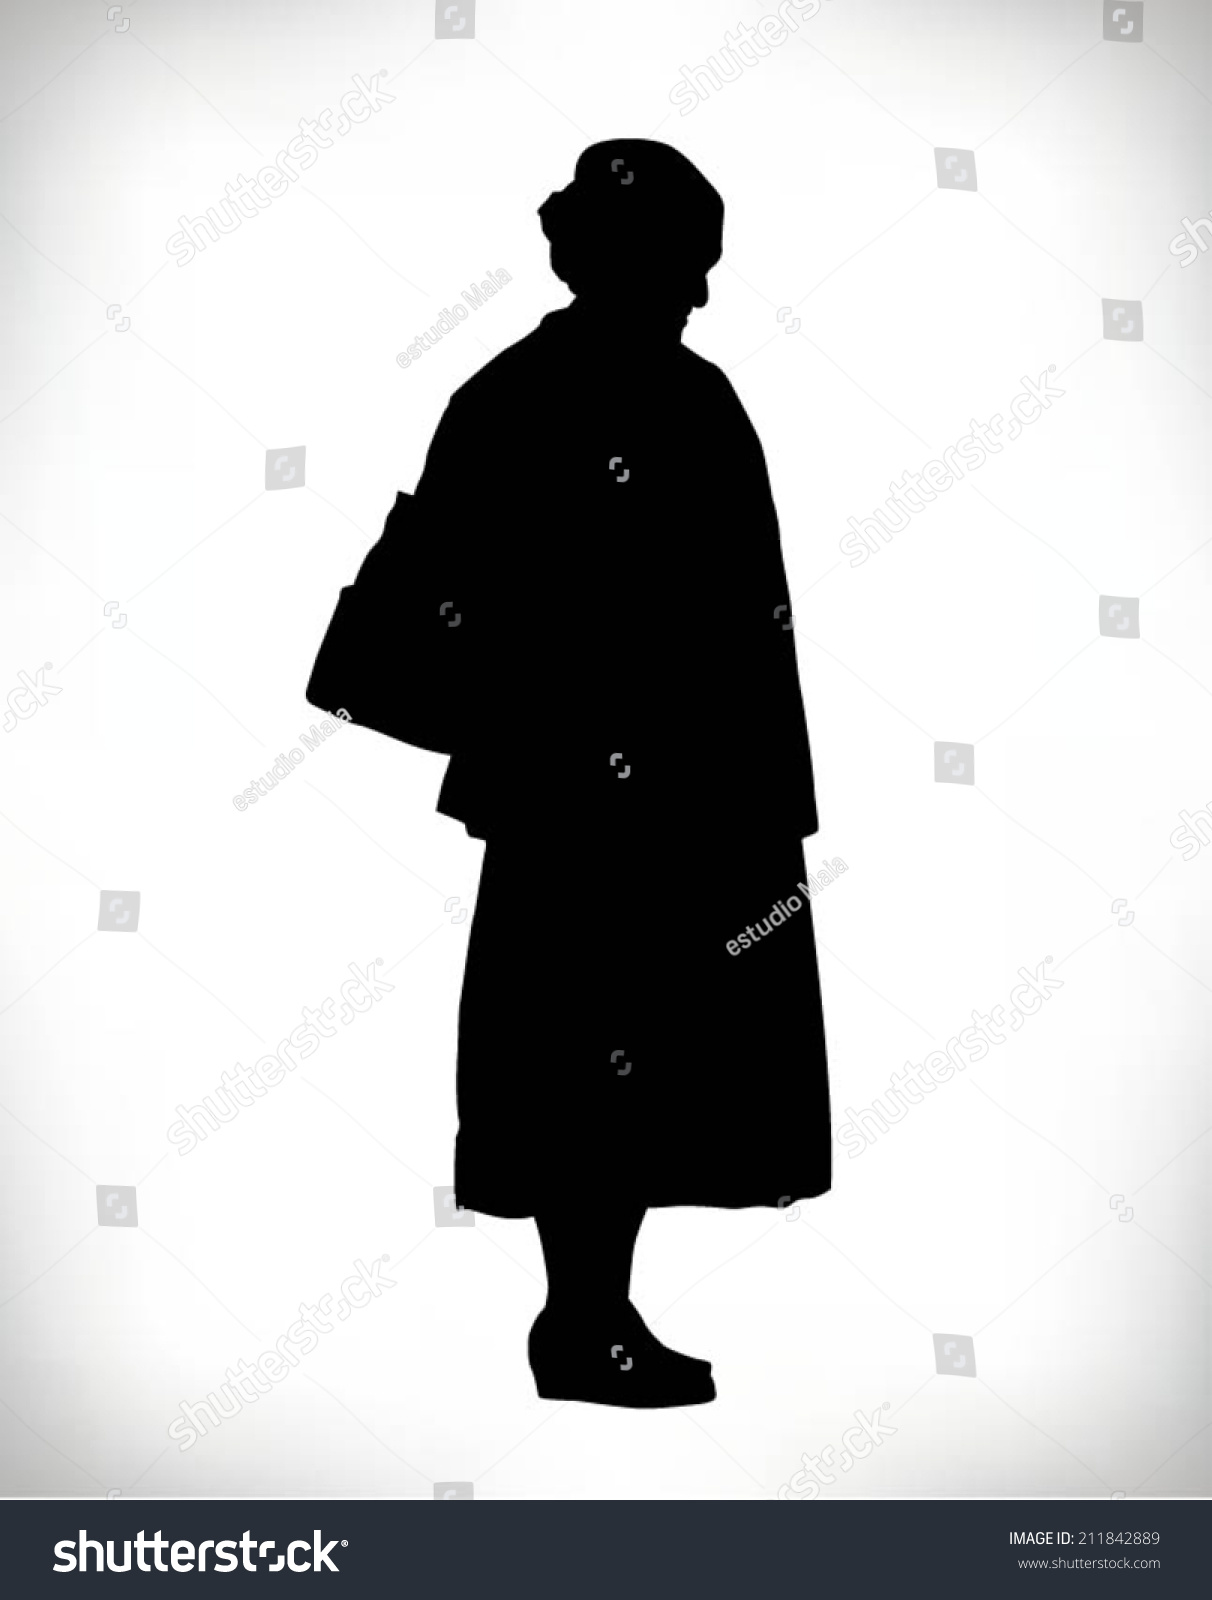 Detailed Silhouette Old Woman Bag Stock Vector 211842889 - Shutterstock